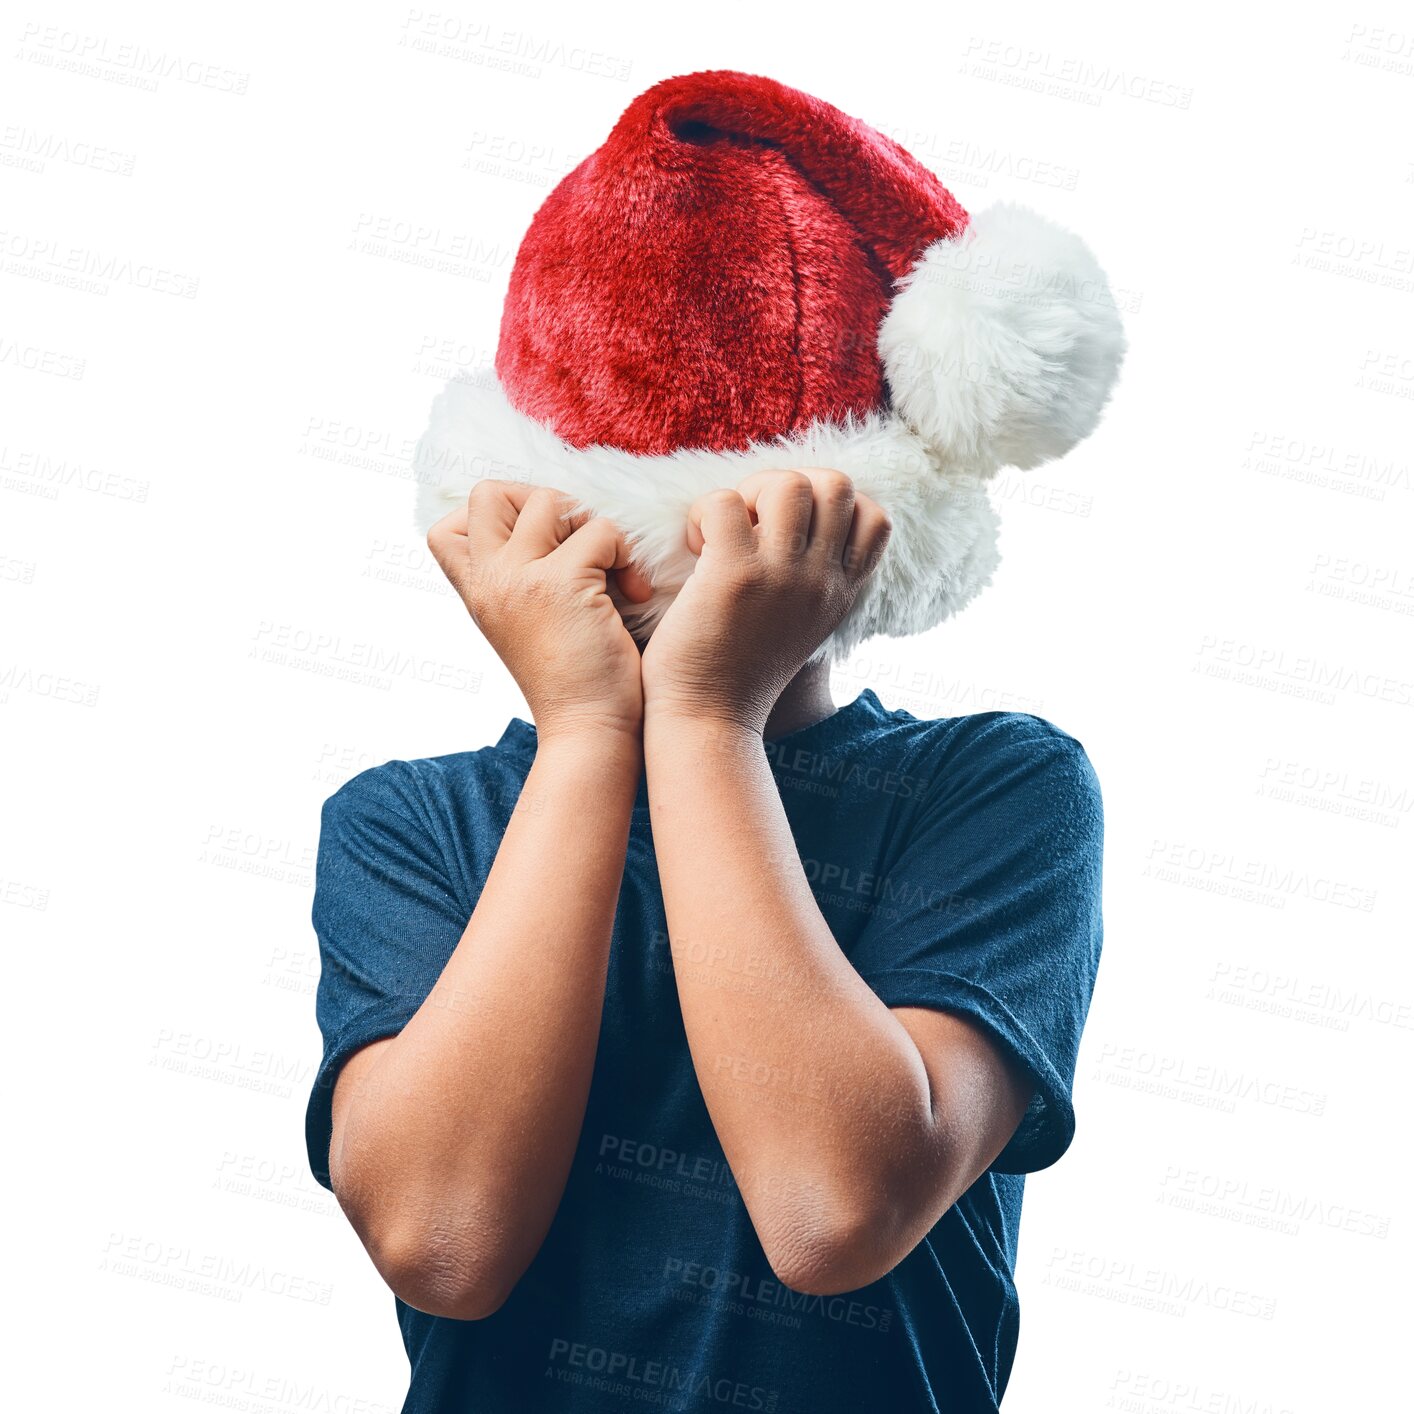 Buy stock photo Boy, Christmas and hat over face crying or hiding emotion standing isolated on a transparent PNG background. Little child, kid or teen covering head with festive red cap in sad emotional depression